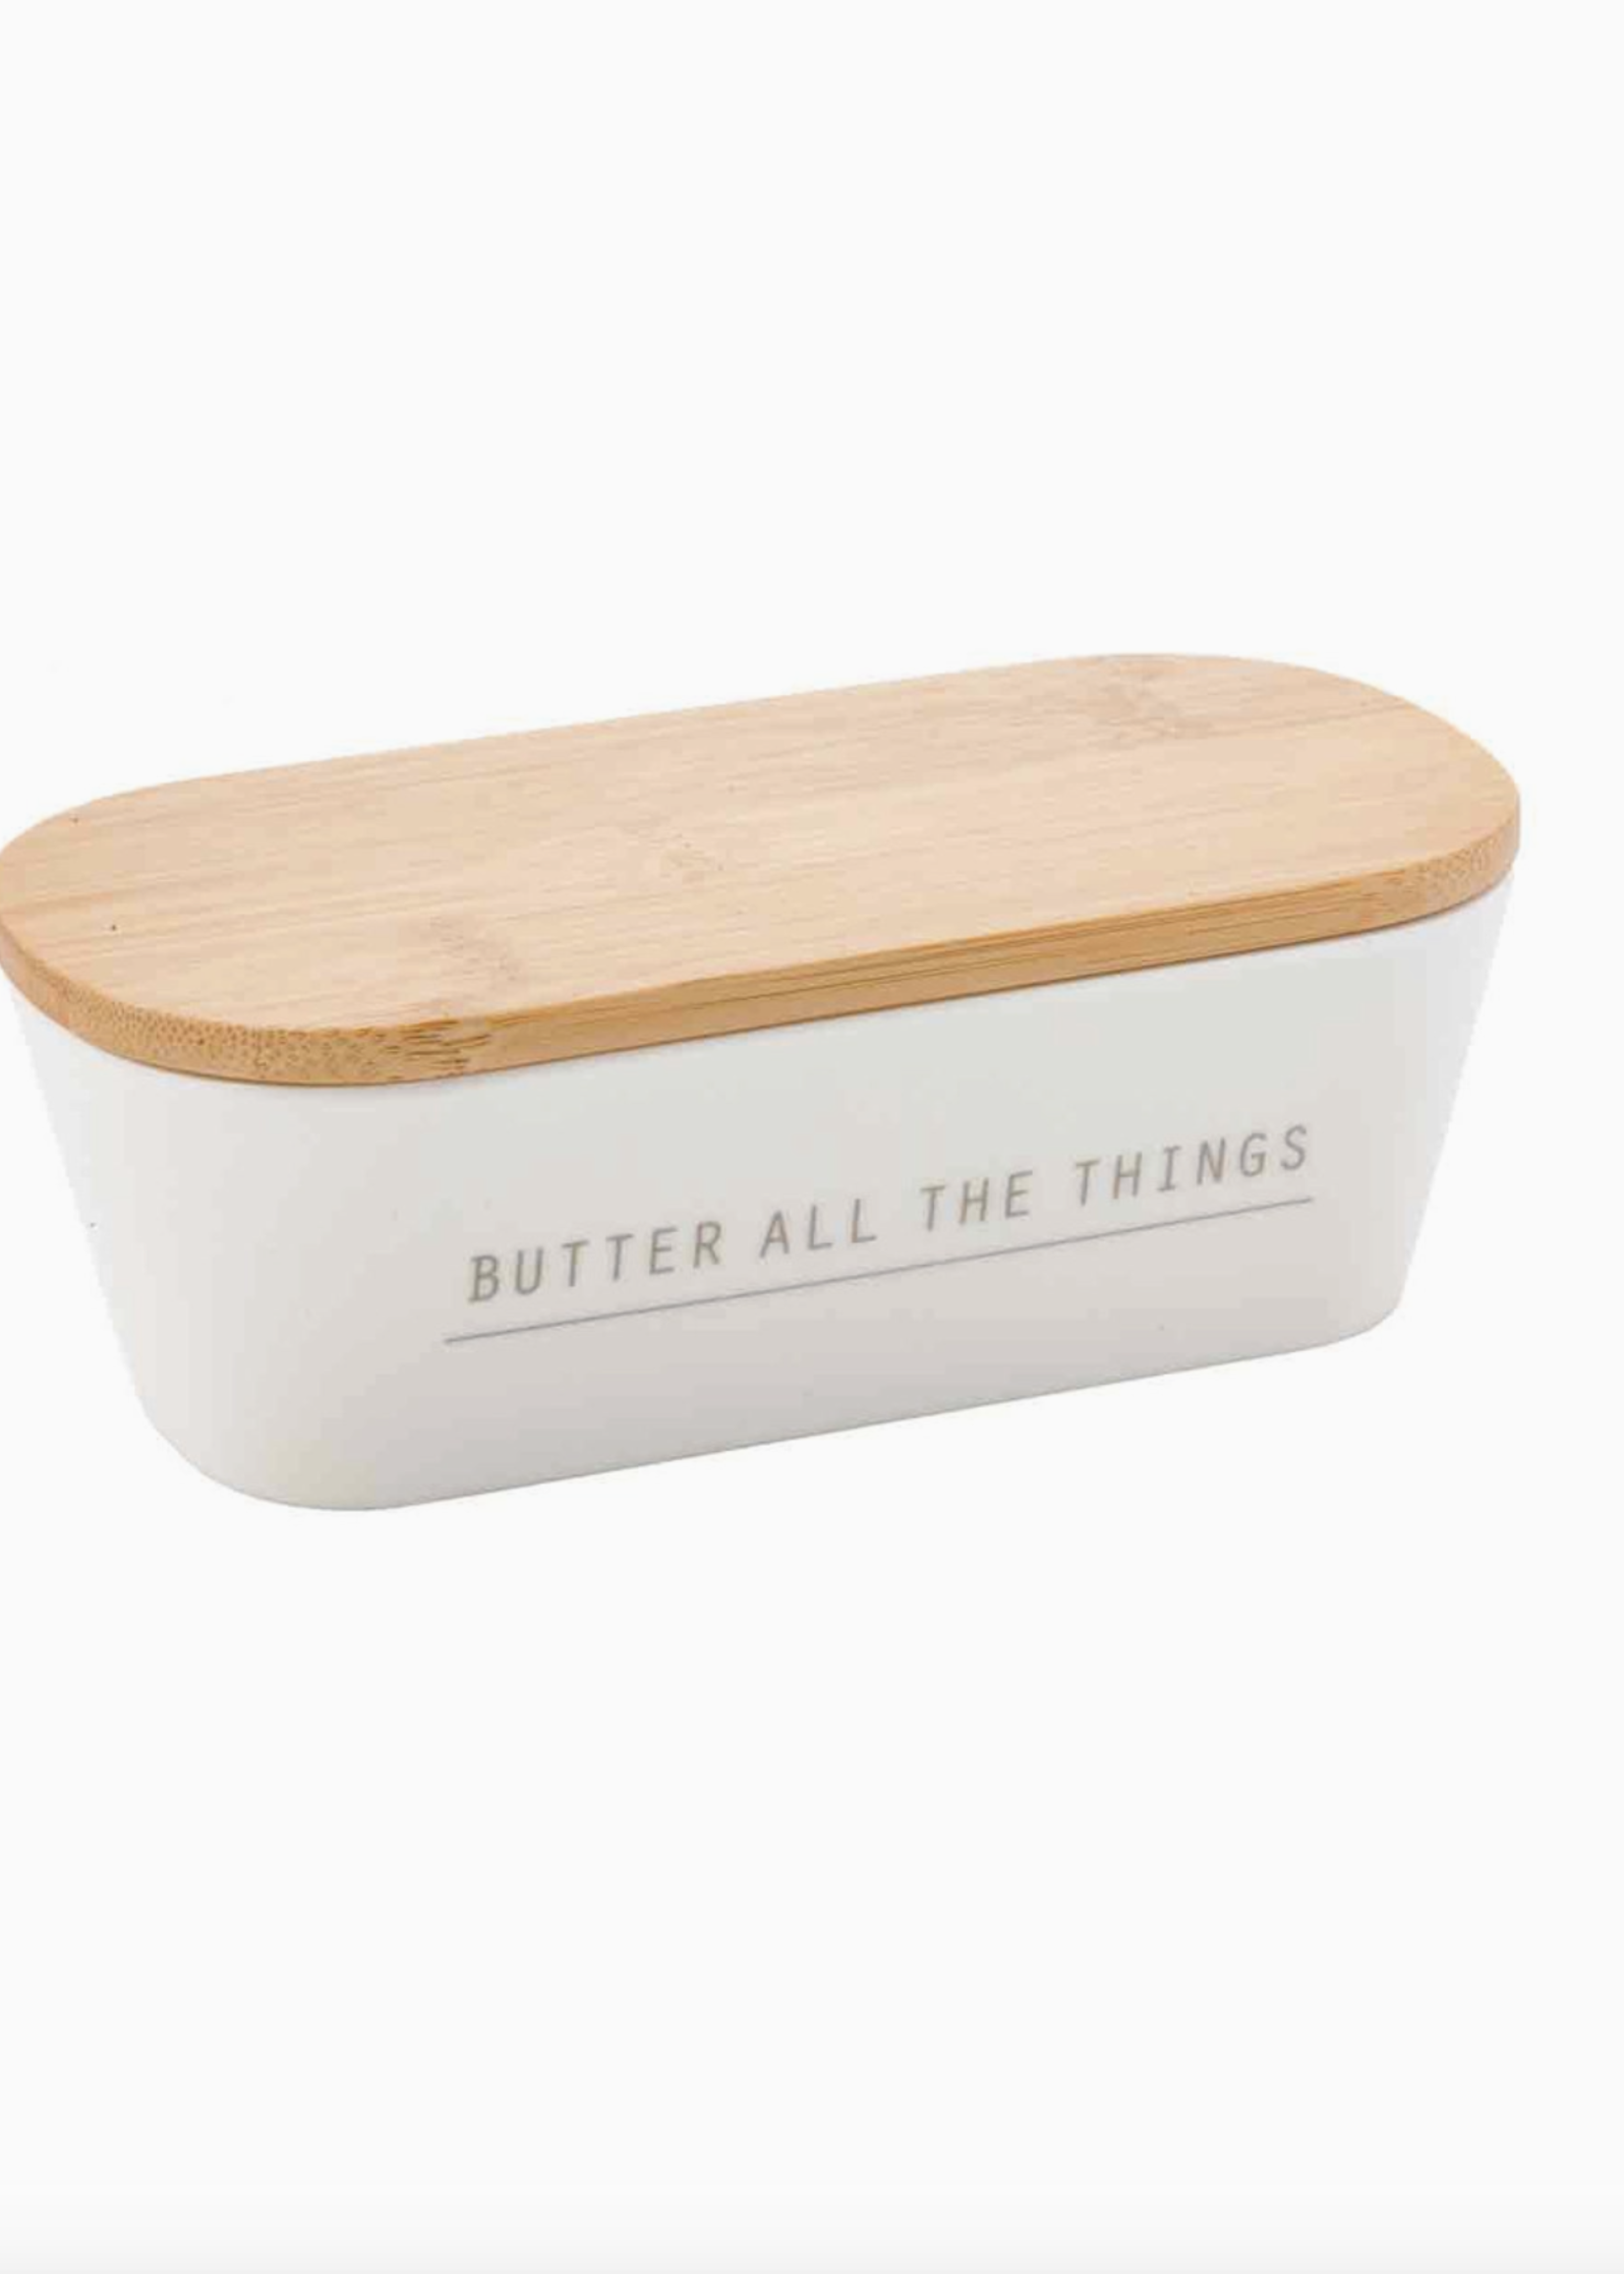 TCFT Butter All The Things Butter Dish w/ Lid